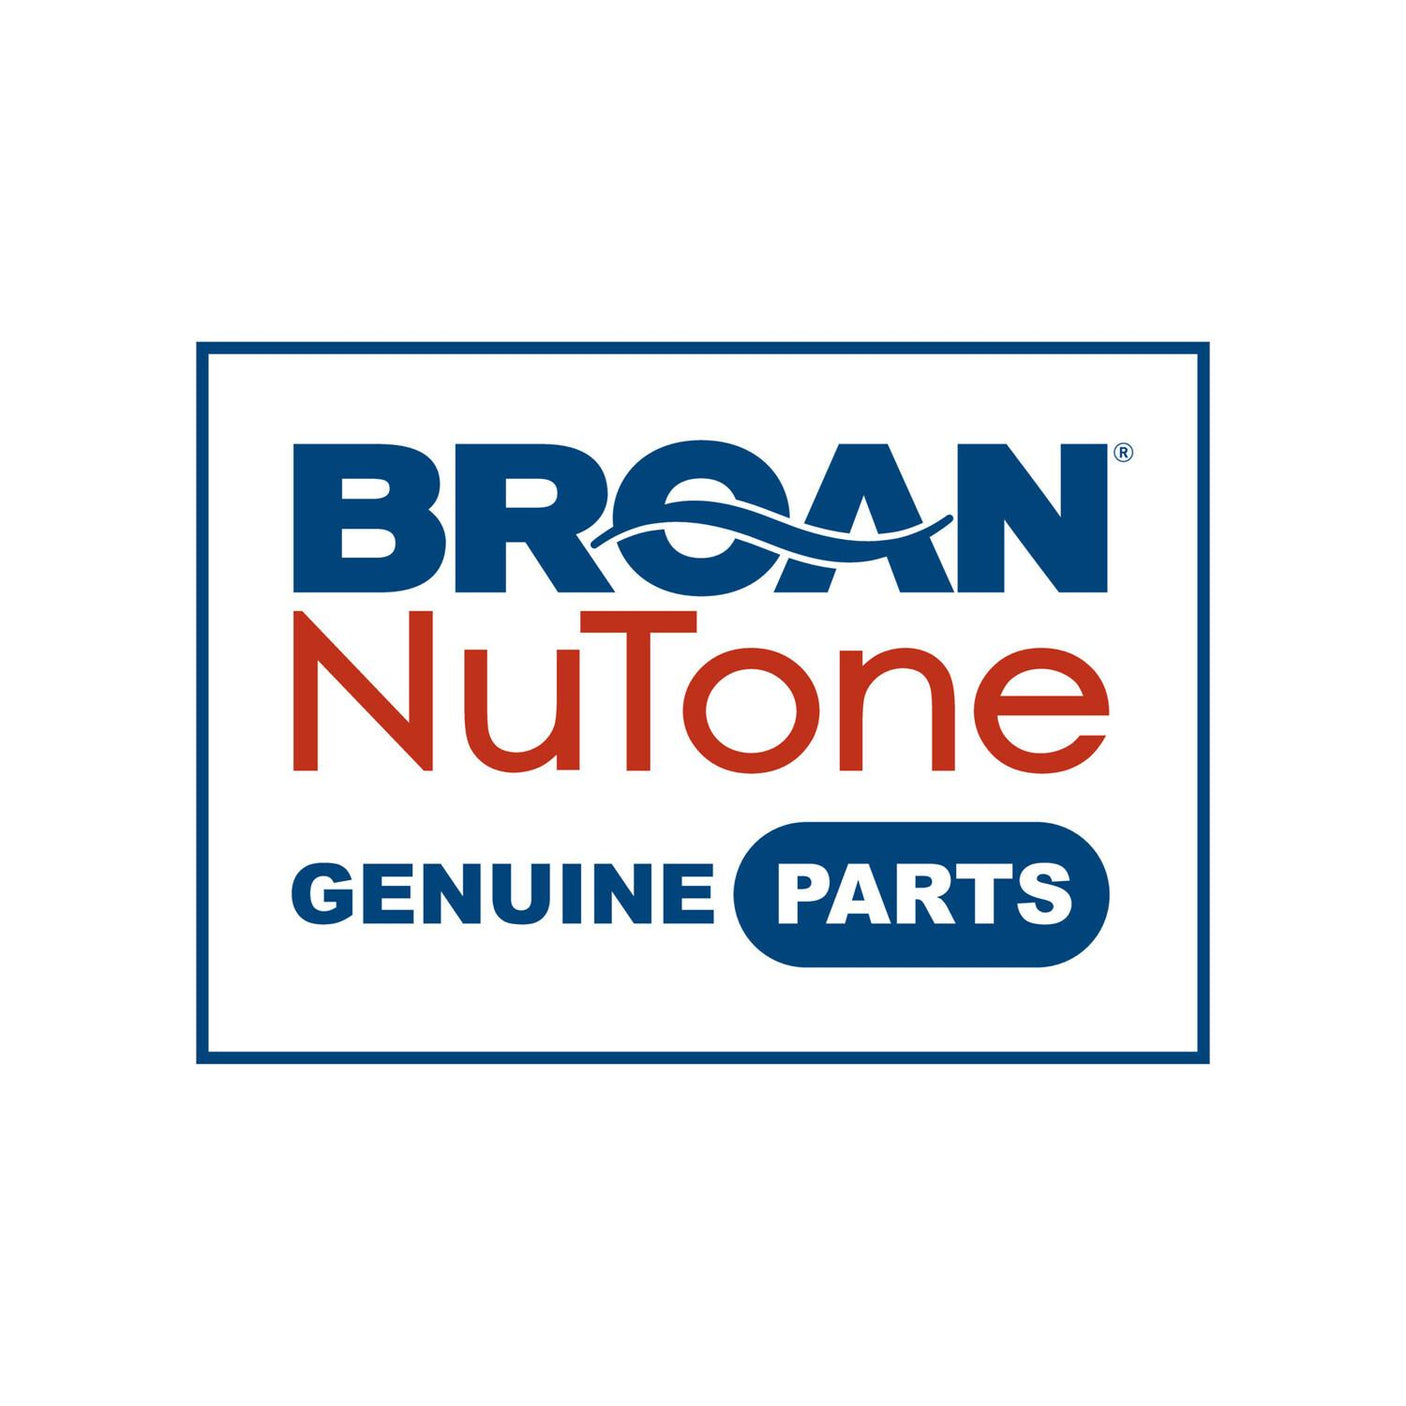 Broan-NuTone® Genuine Replacement Aluminum Filter for Range Hoods, 14-3/8" X 11-7/8", Fits Select Models, 2-Pack